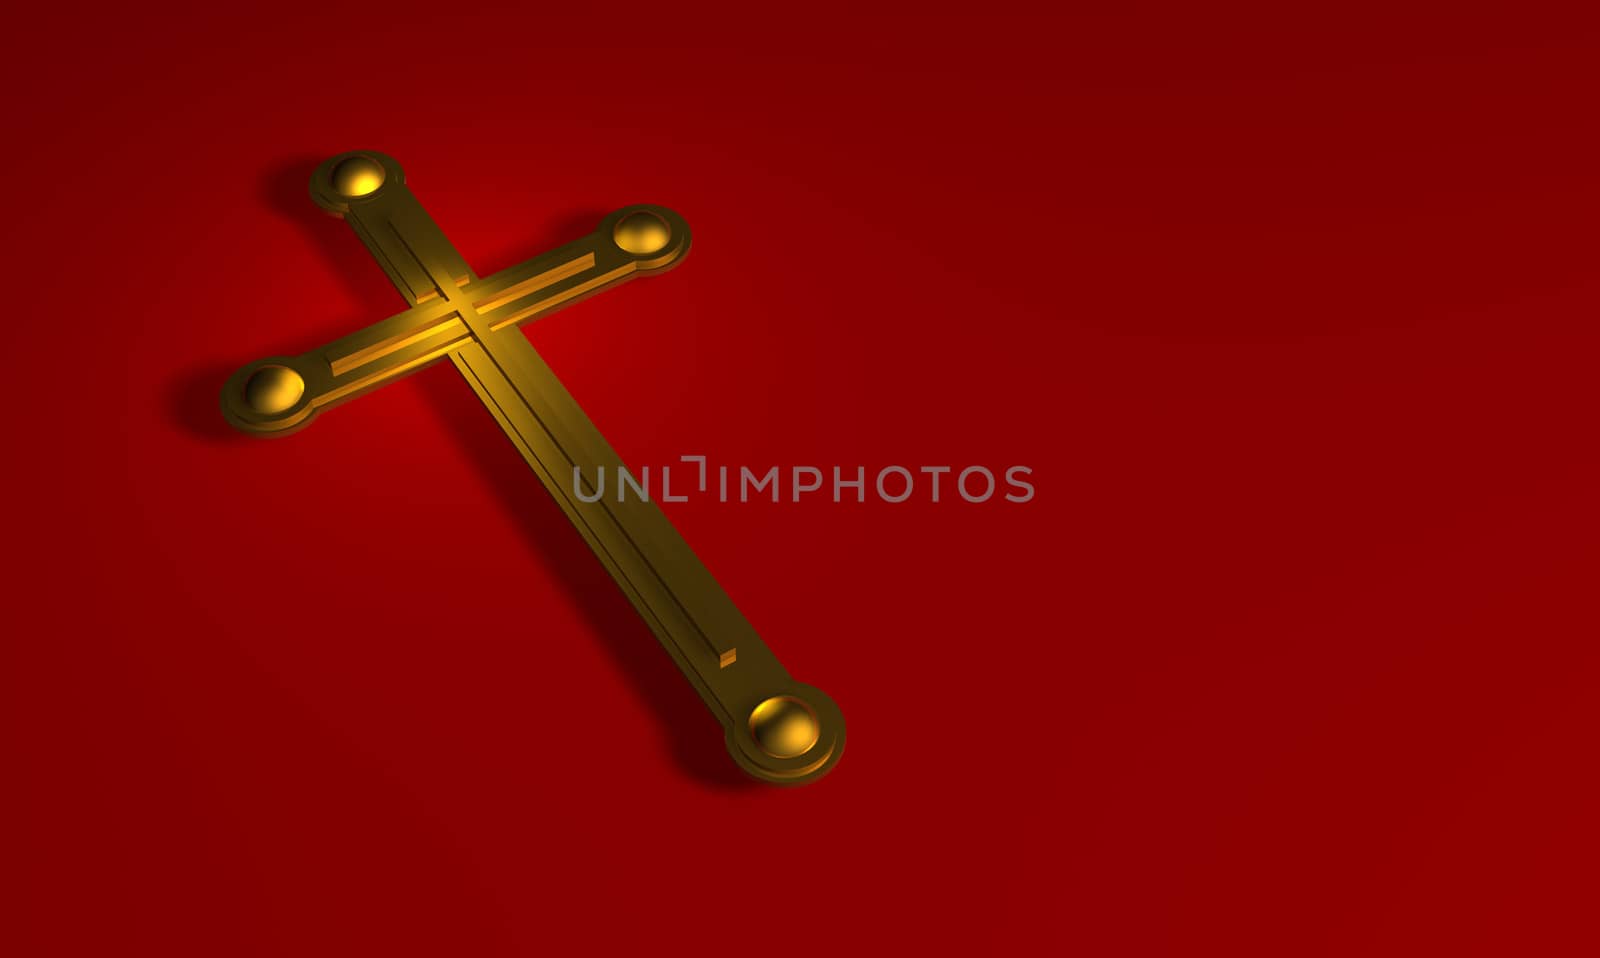 Gold cross on red background made in 3d software